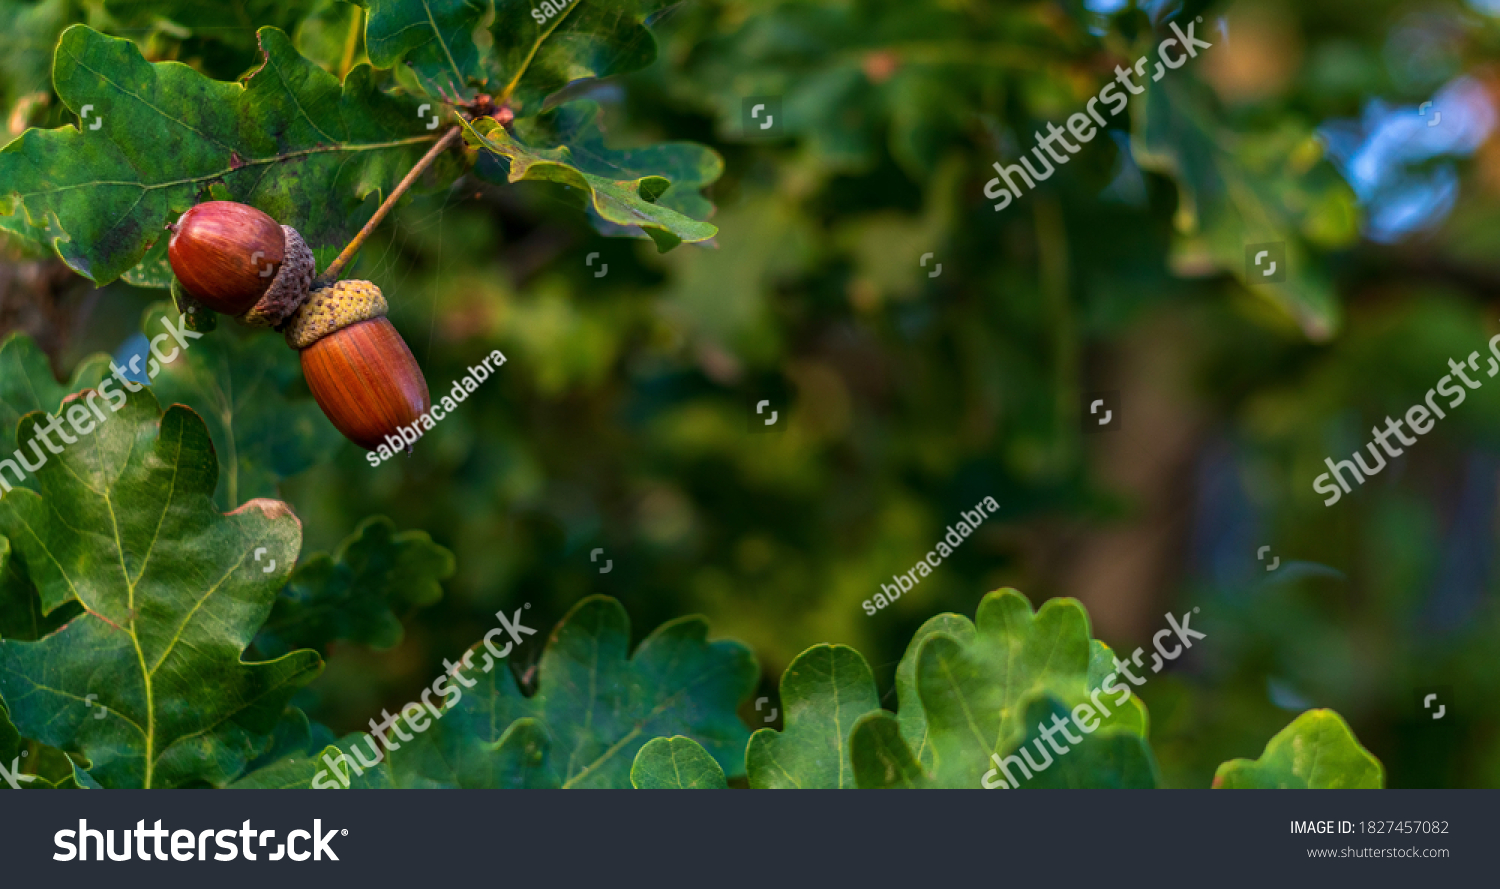 Brown acorns on an oak tree branch in a forest. Closeup oak fruits and leaves on a green background #1827457082